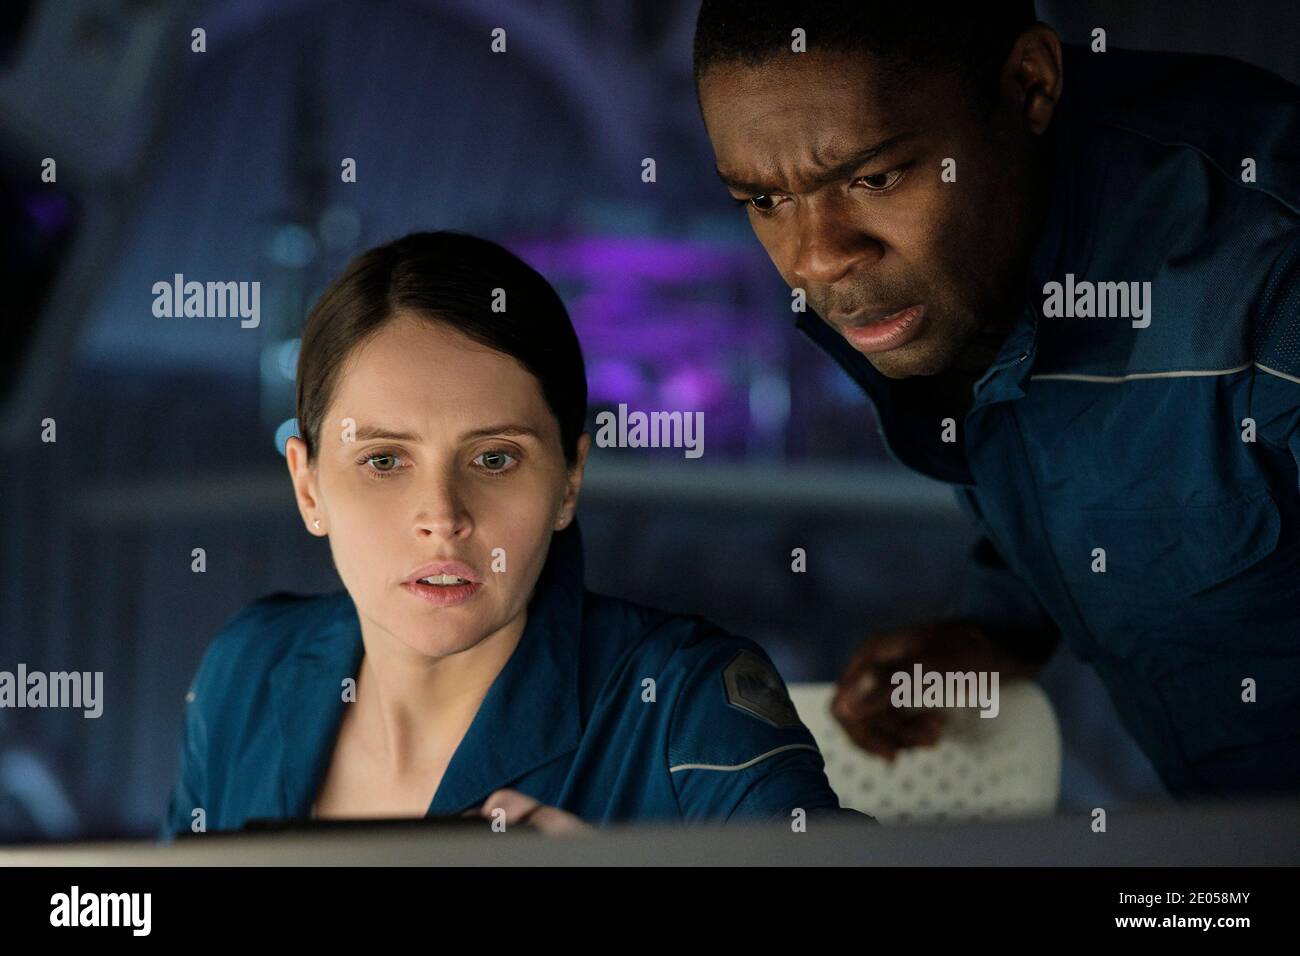 RELEASE DATE: TITLE: December 23, 2020 The Midnight Sky STUDIO: Netflix DIRECTOR: George Clooney PLOT: This post-apocalyptic tale follows Augustine, a lonely scientist in the Arctic, as he races to stop Sully and her fellow astronauts from returning home to a mysterious global catastrophe. STARRING: FELICITY JONES as Sully, DAVID OYELOWO as Tom Adewole. (Credit Image: © Netflix/Entertainment Pictures) Stock Photo